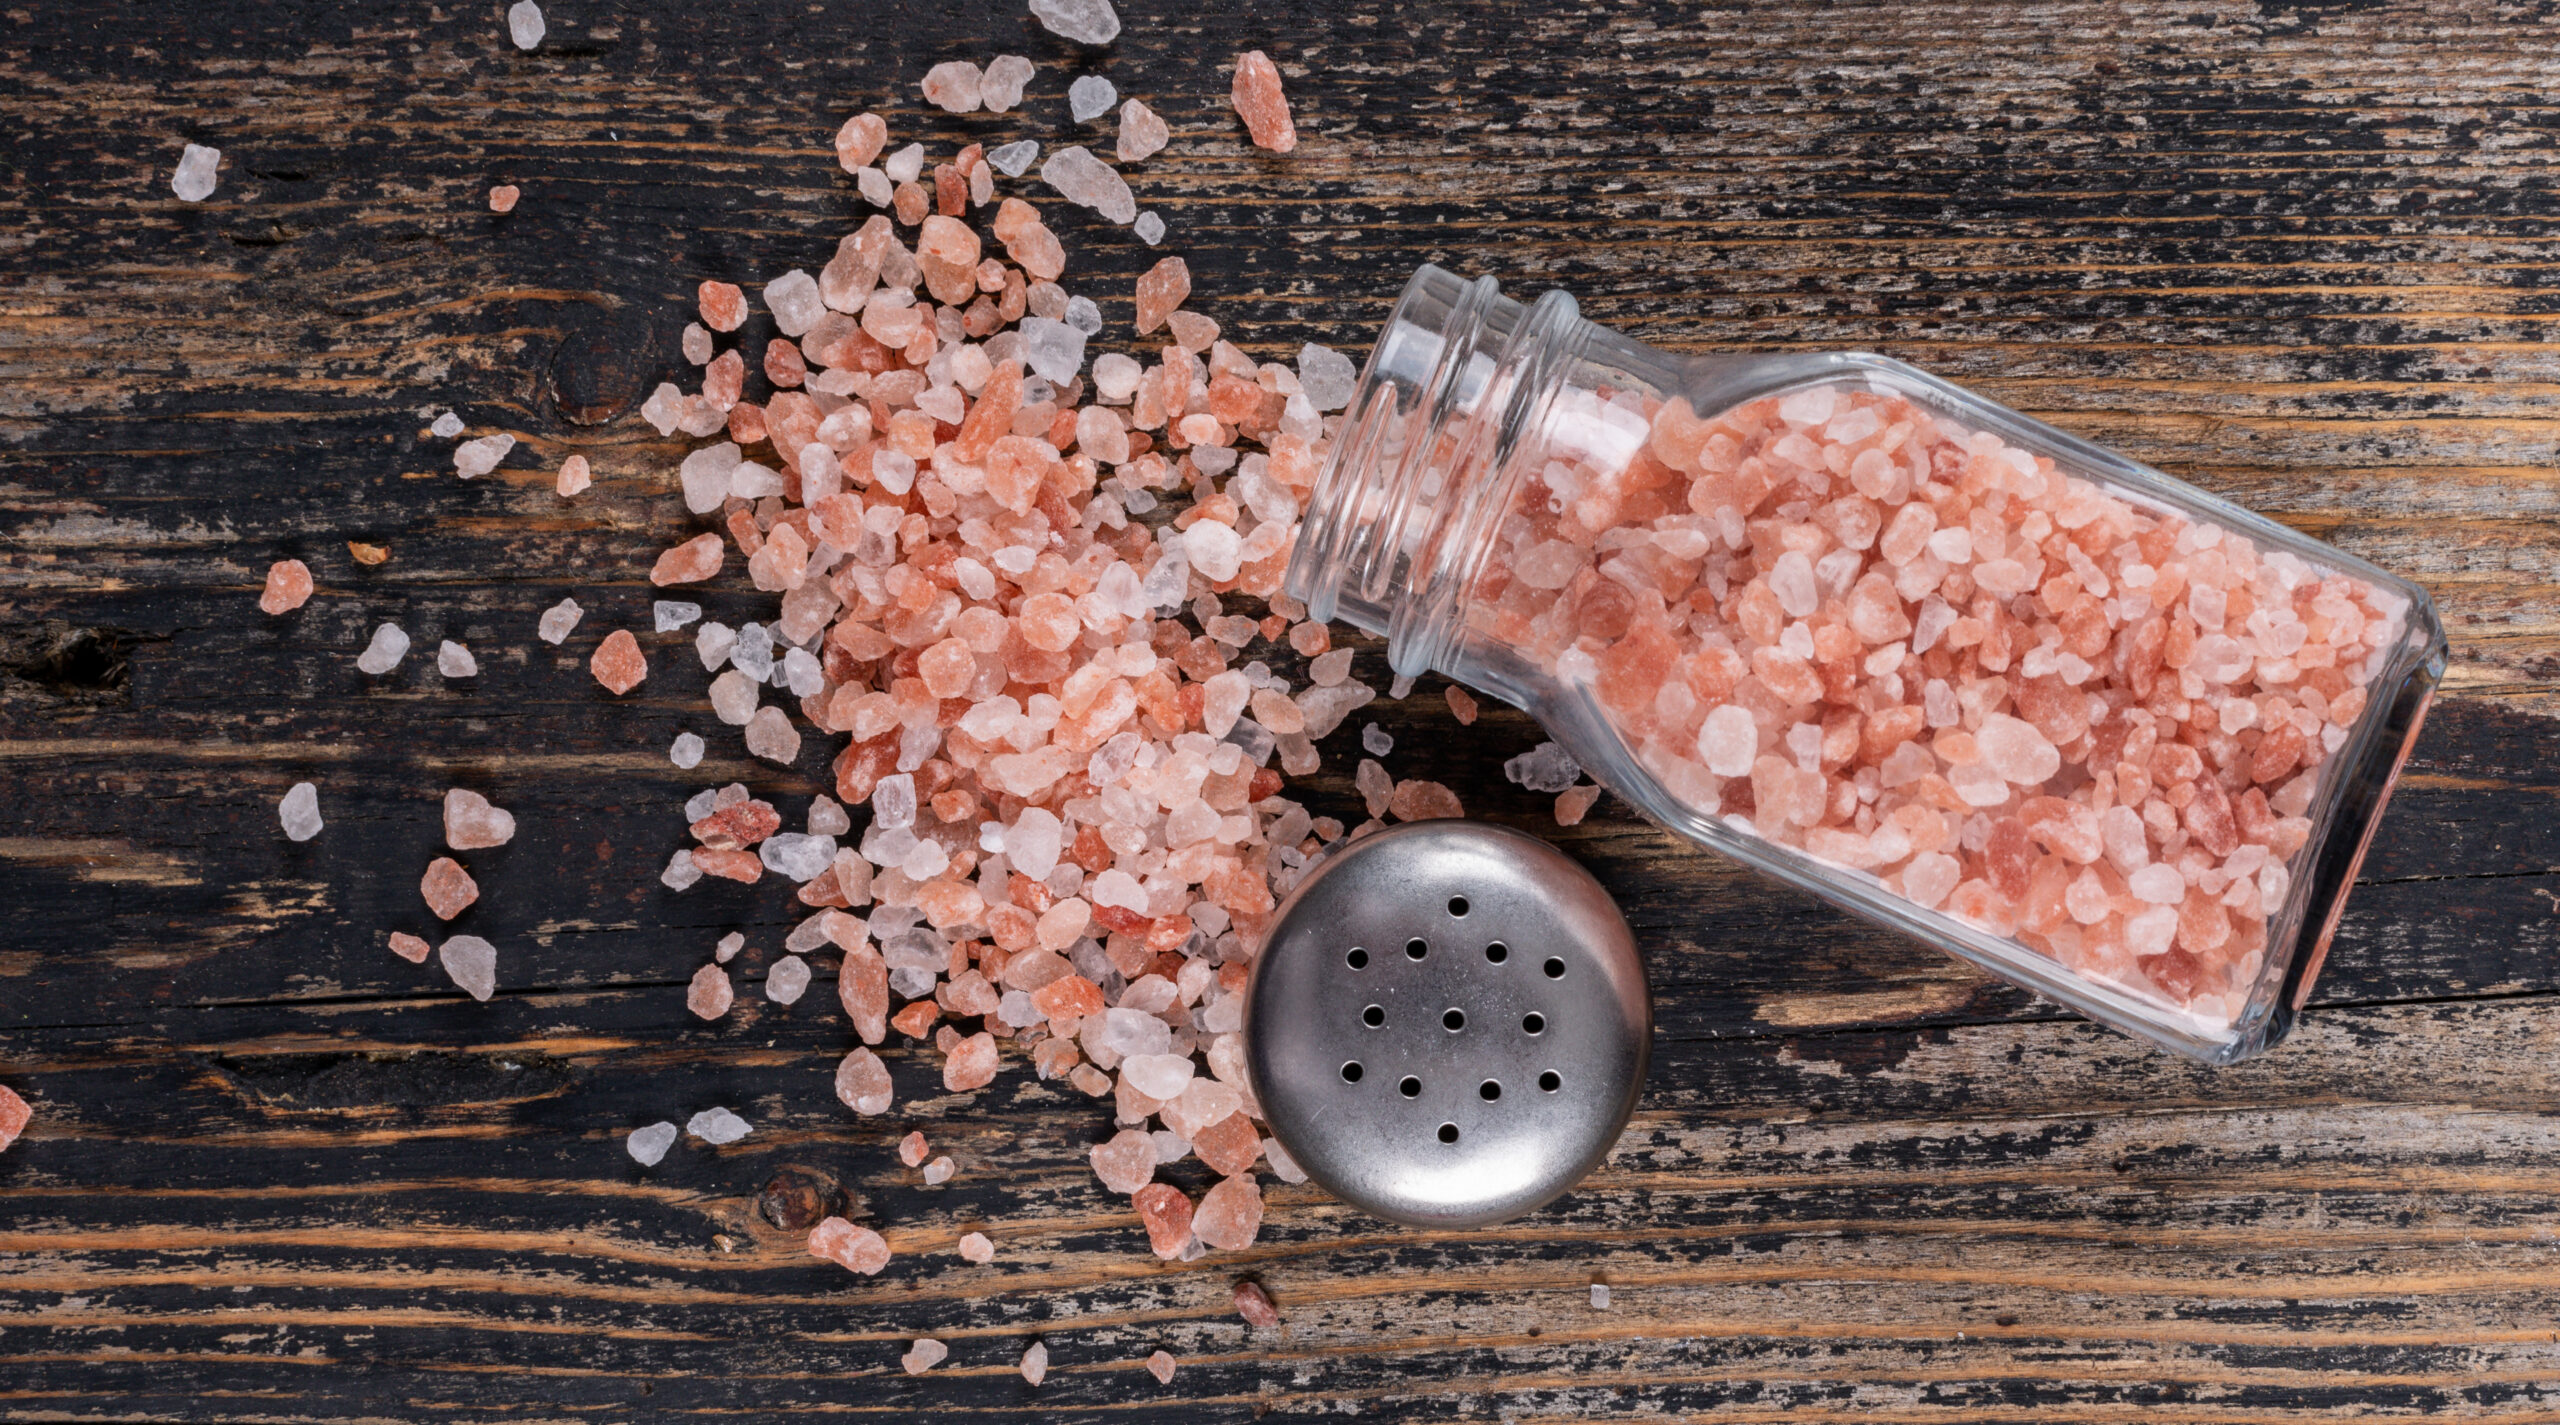 Himalayan Salt Coming Out Of Open Salt Shaker On A Dark Wooden Background. Top View.